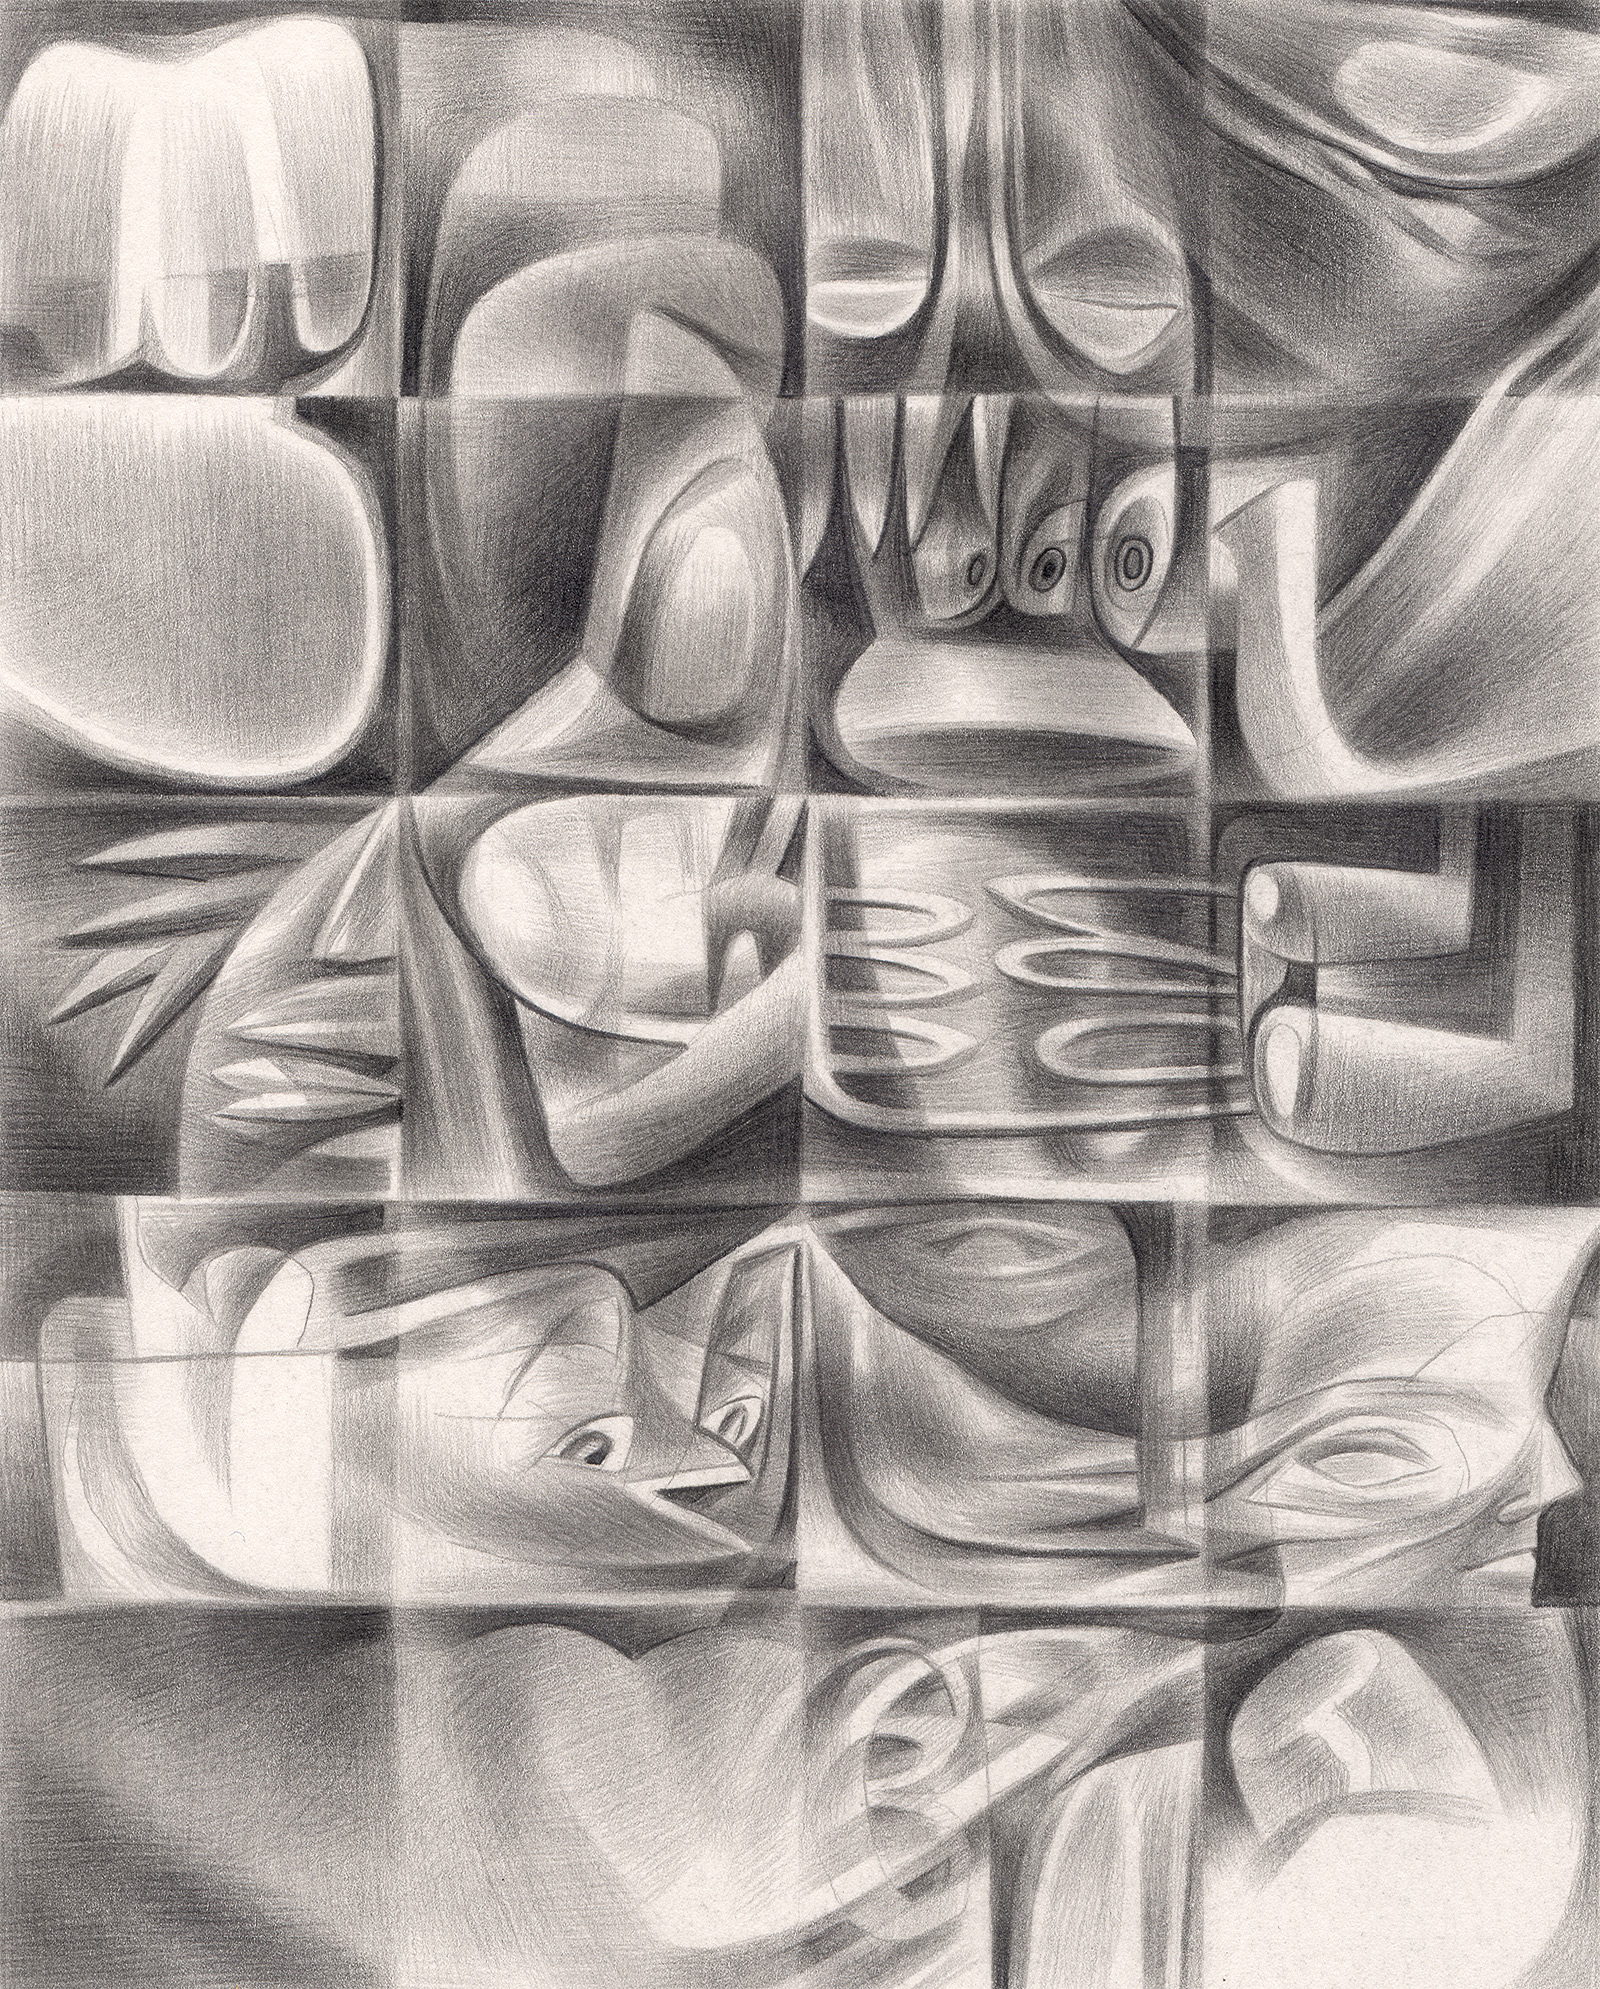   The Truant Officer's Bride , 2005. Graphite on paper. 6" x 7". 